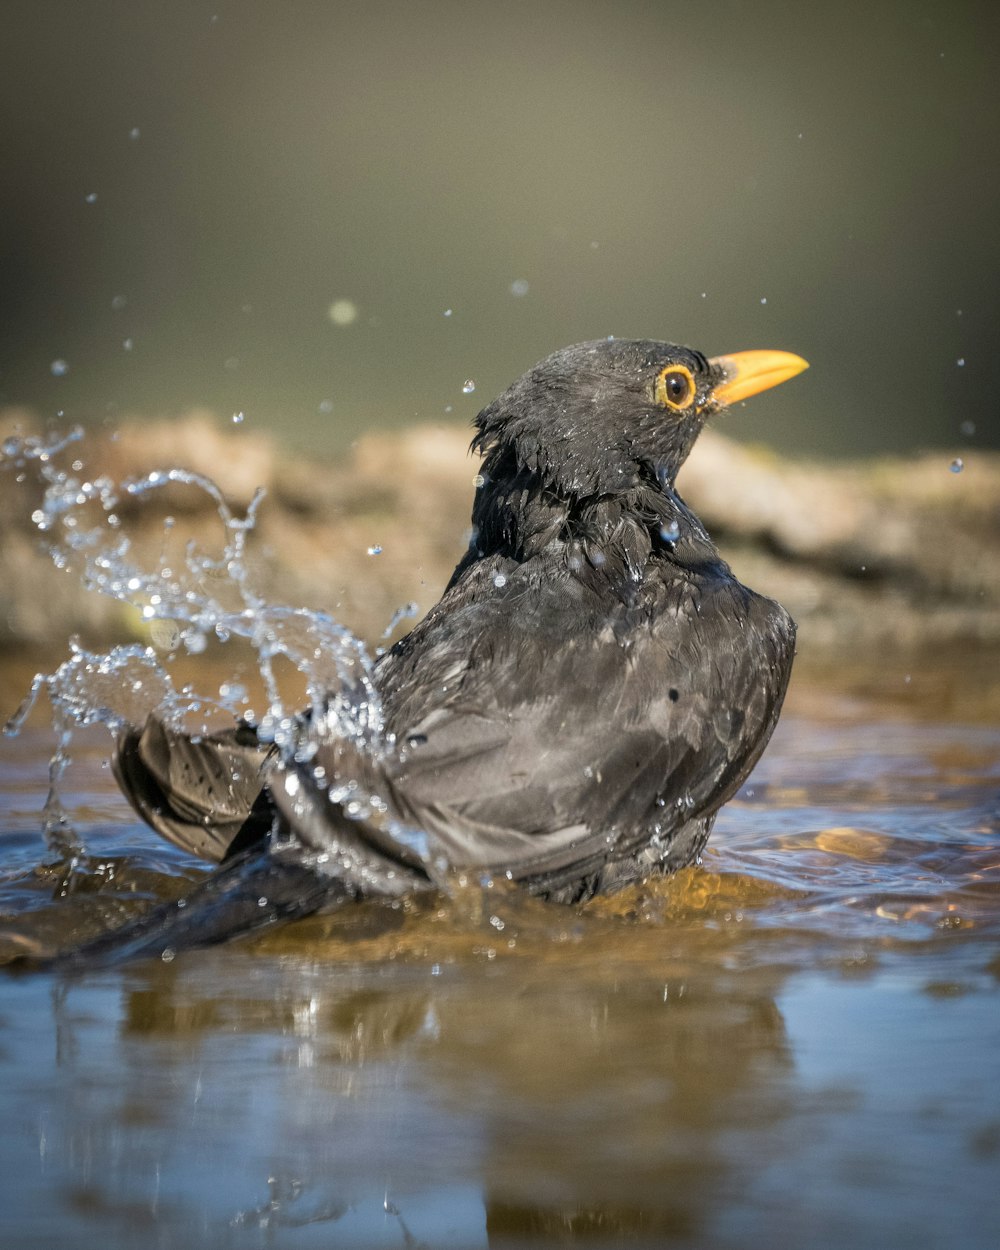 a black bird with a yellow beak sitting in a body of water